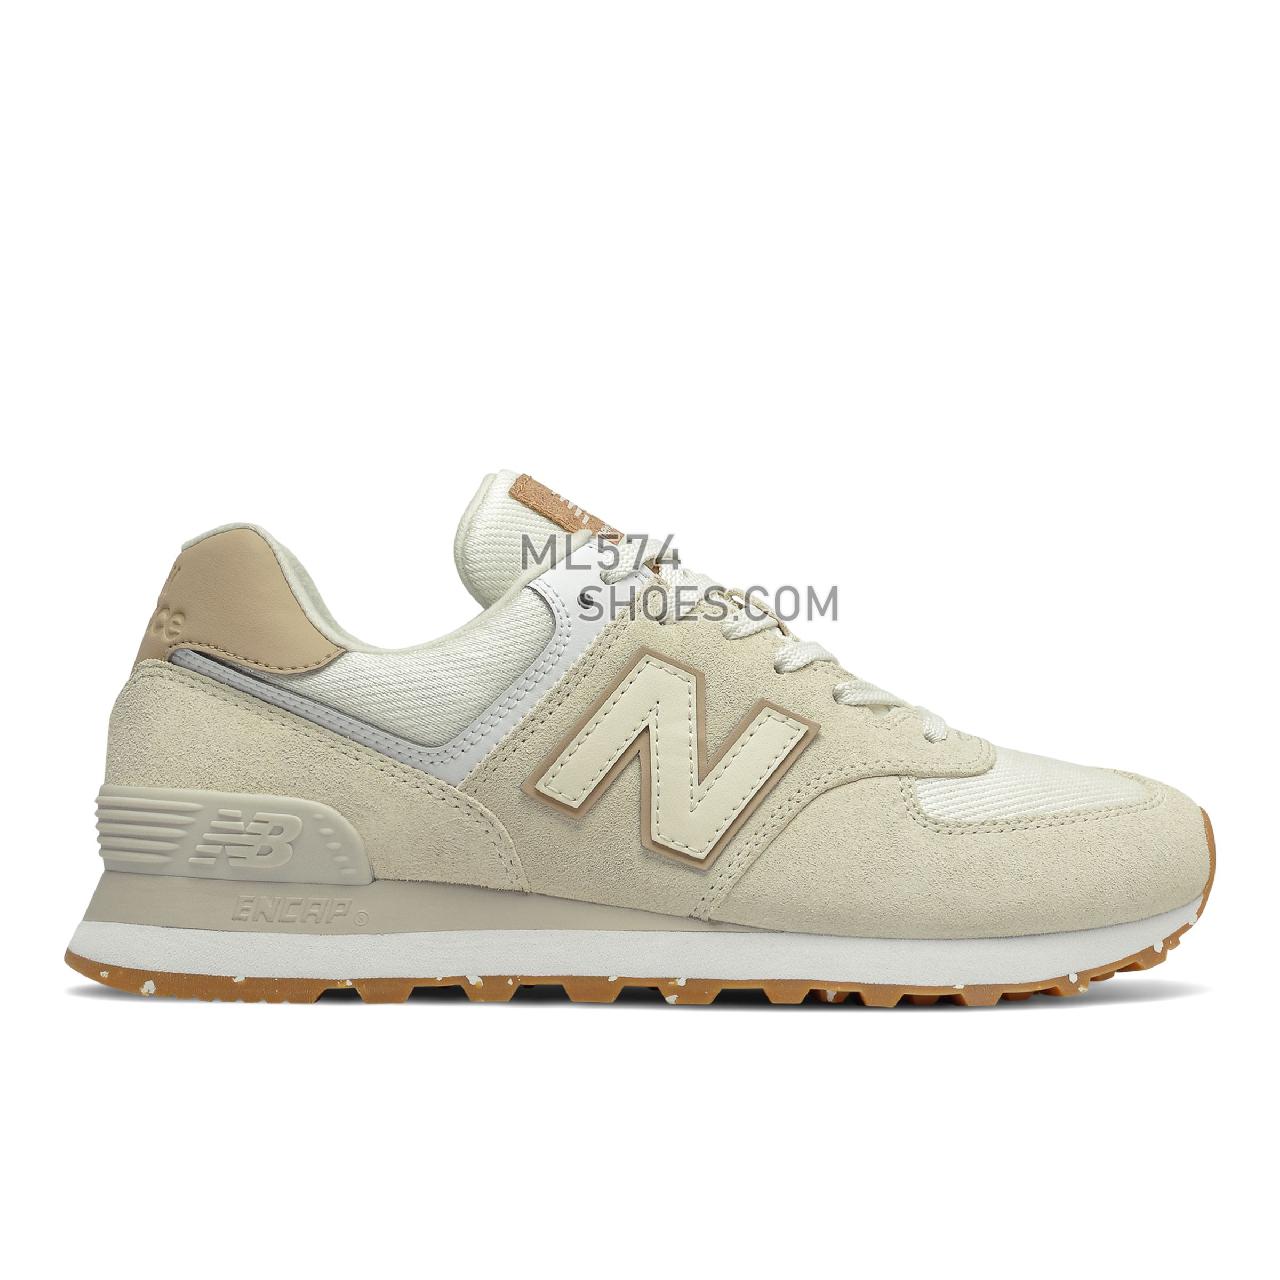 New Balance 574 - Women's Classic Sneakers - Angora with Incense - WL574SL2